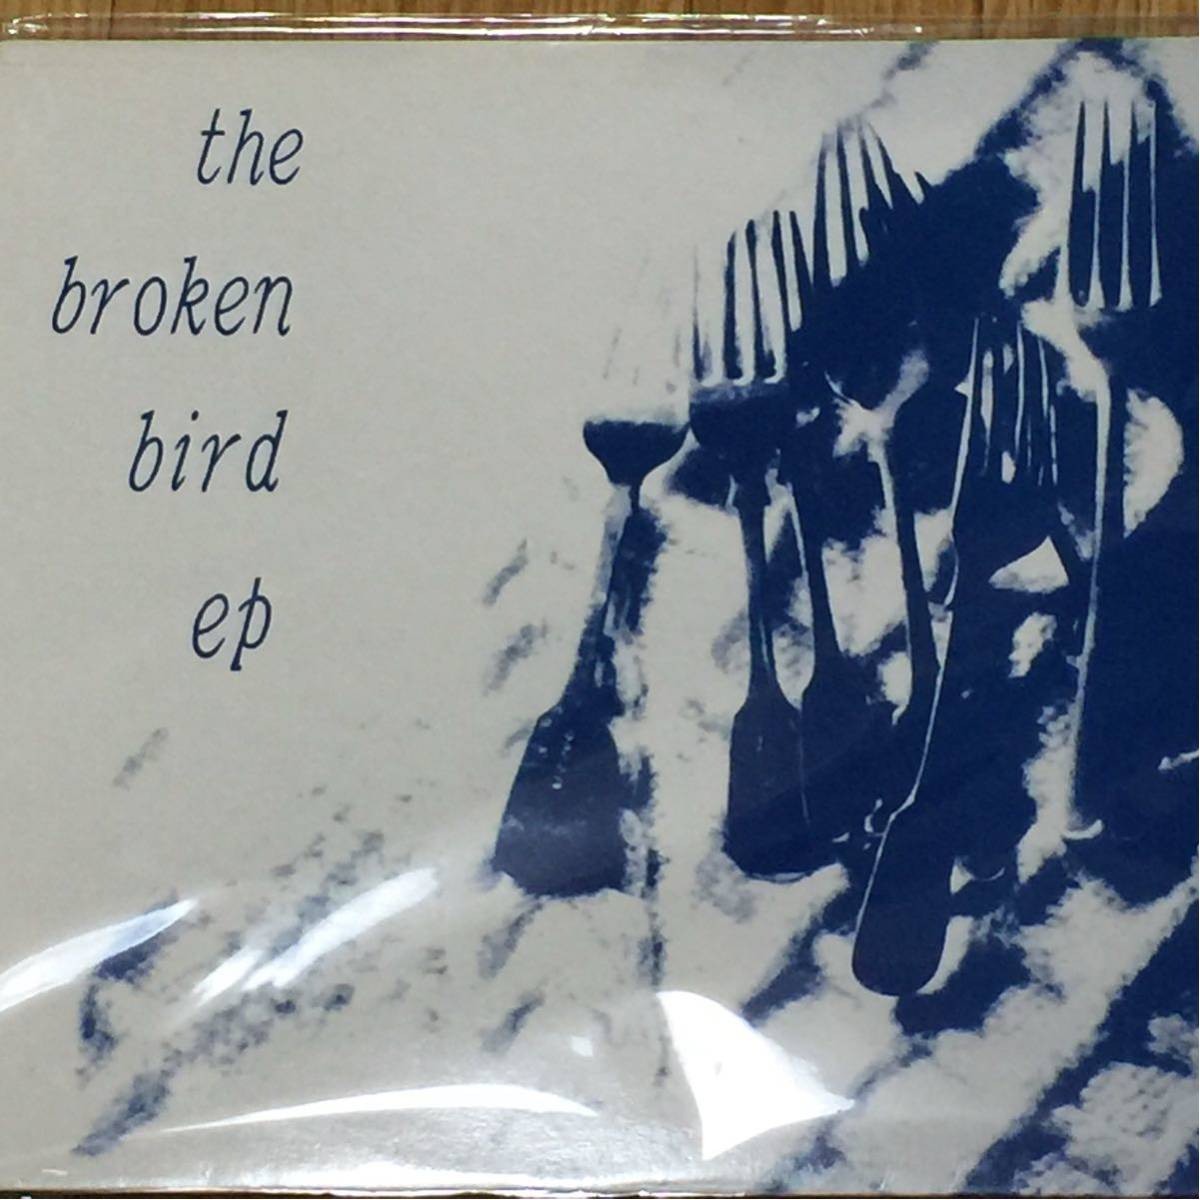  Osaka departure shoe gei The -* band WHITE COME COME [THE BROKEN BIRD EP] SUGARFROST My Bloody Valentine my blaRIDE SARAH RECORDS